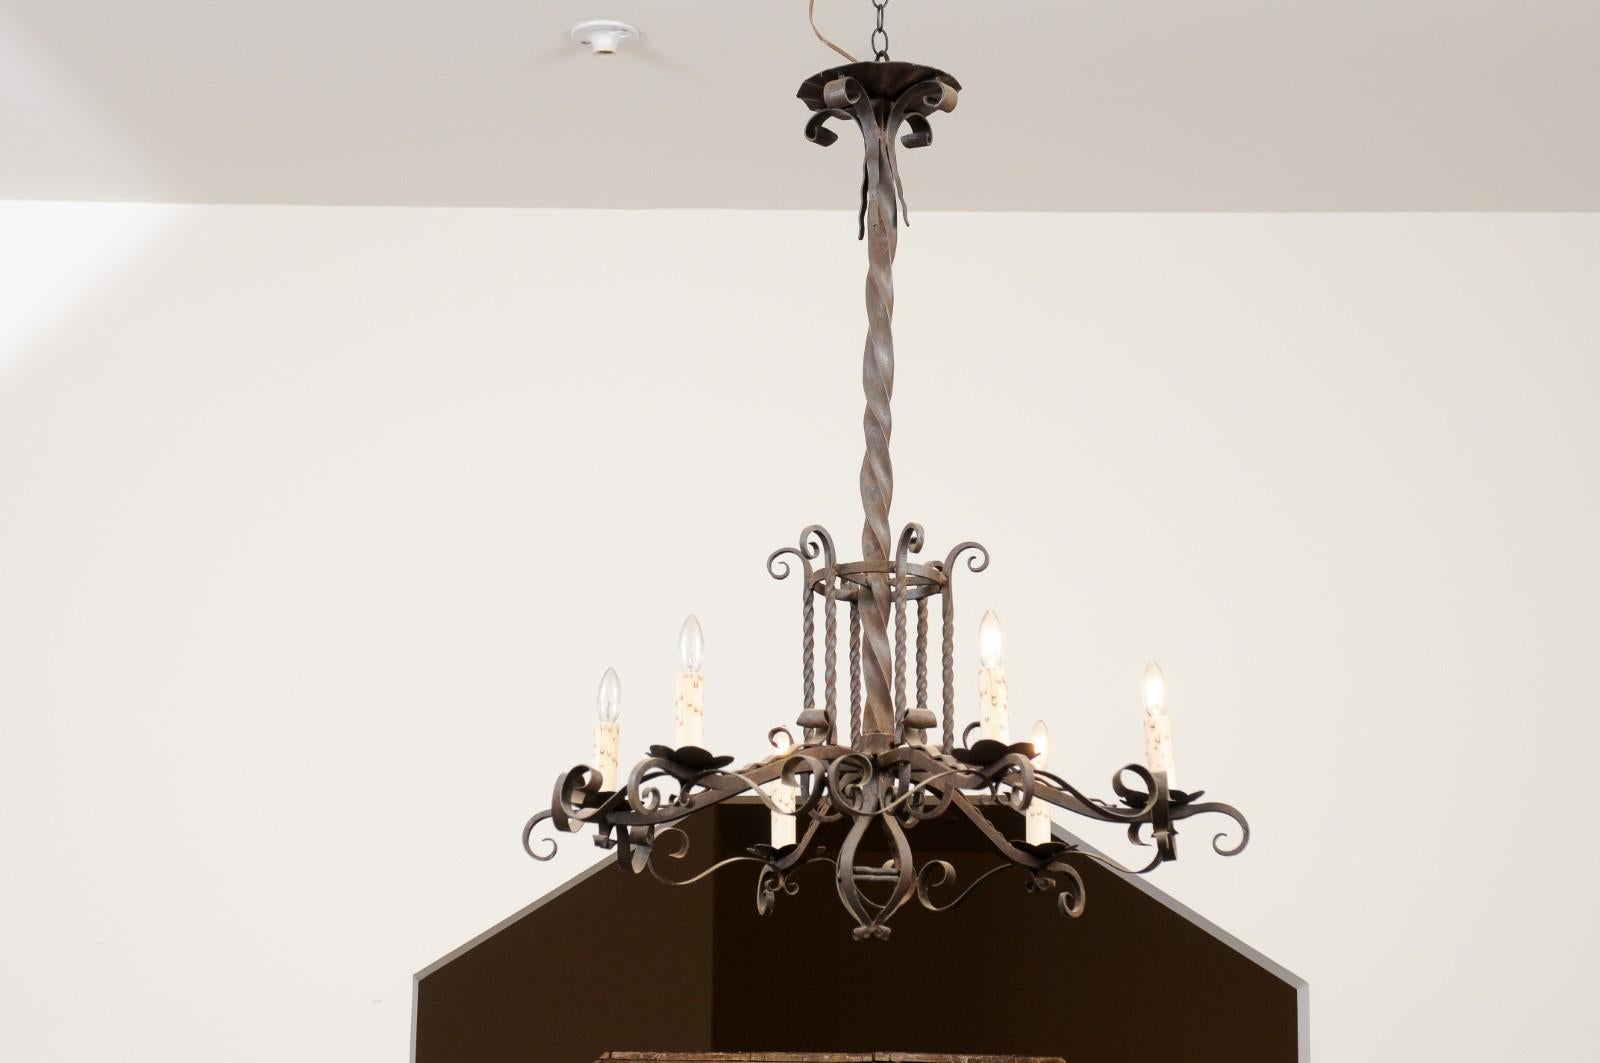 A French Napoléon III period six-light iron chandelier from late 19th century with scrolling accents and twisted patterns. Created in France at the end of emperor Napoléon III's reign, this iron chandelier features a twisted shaft supporting six